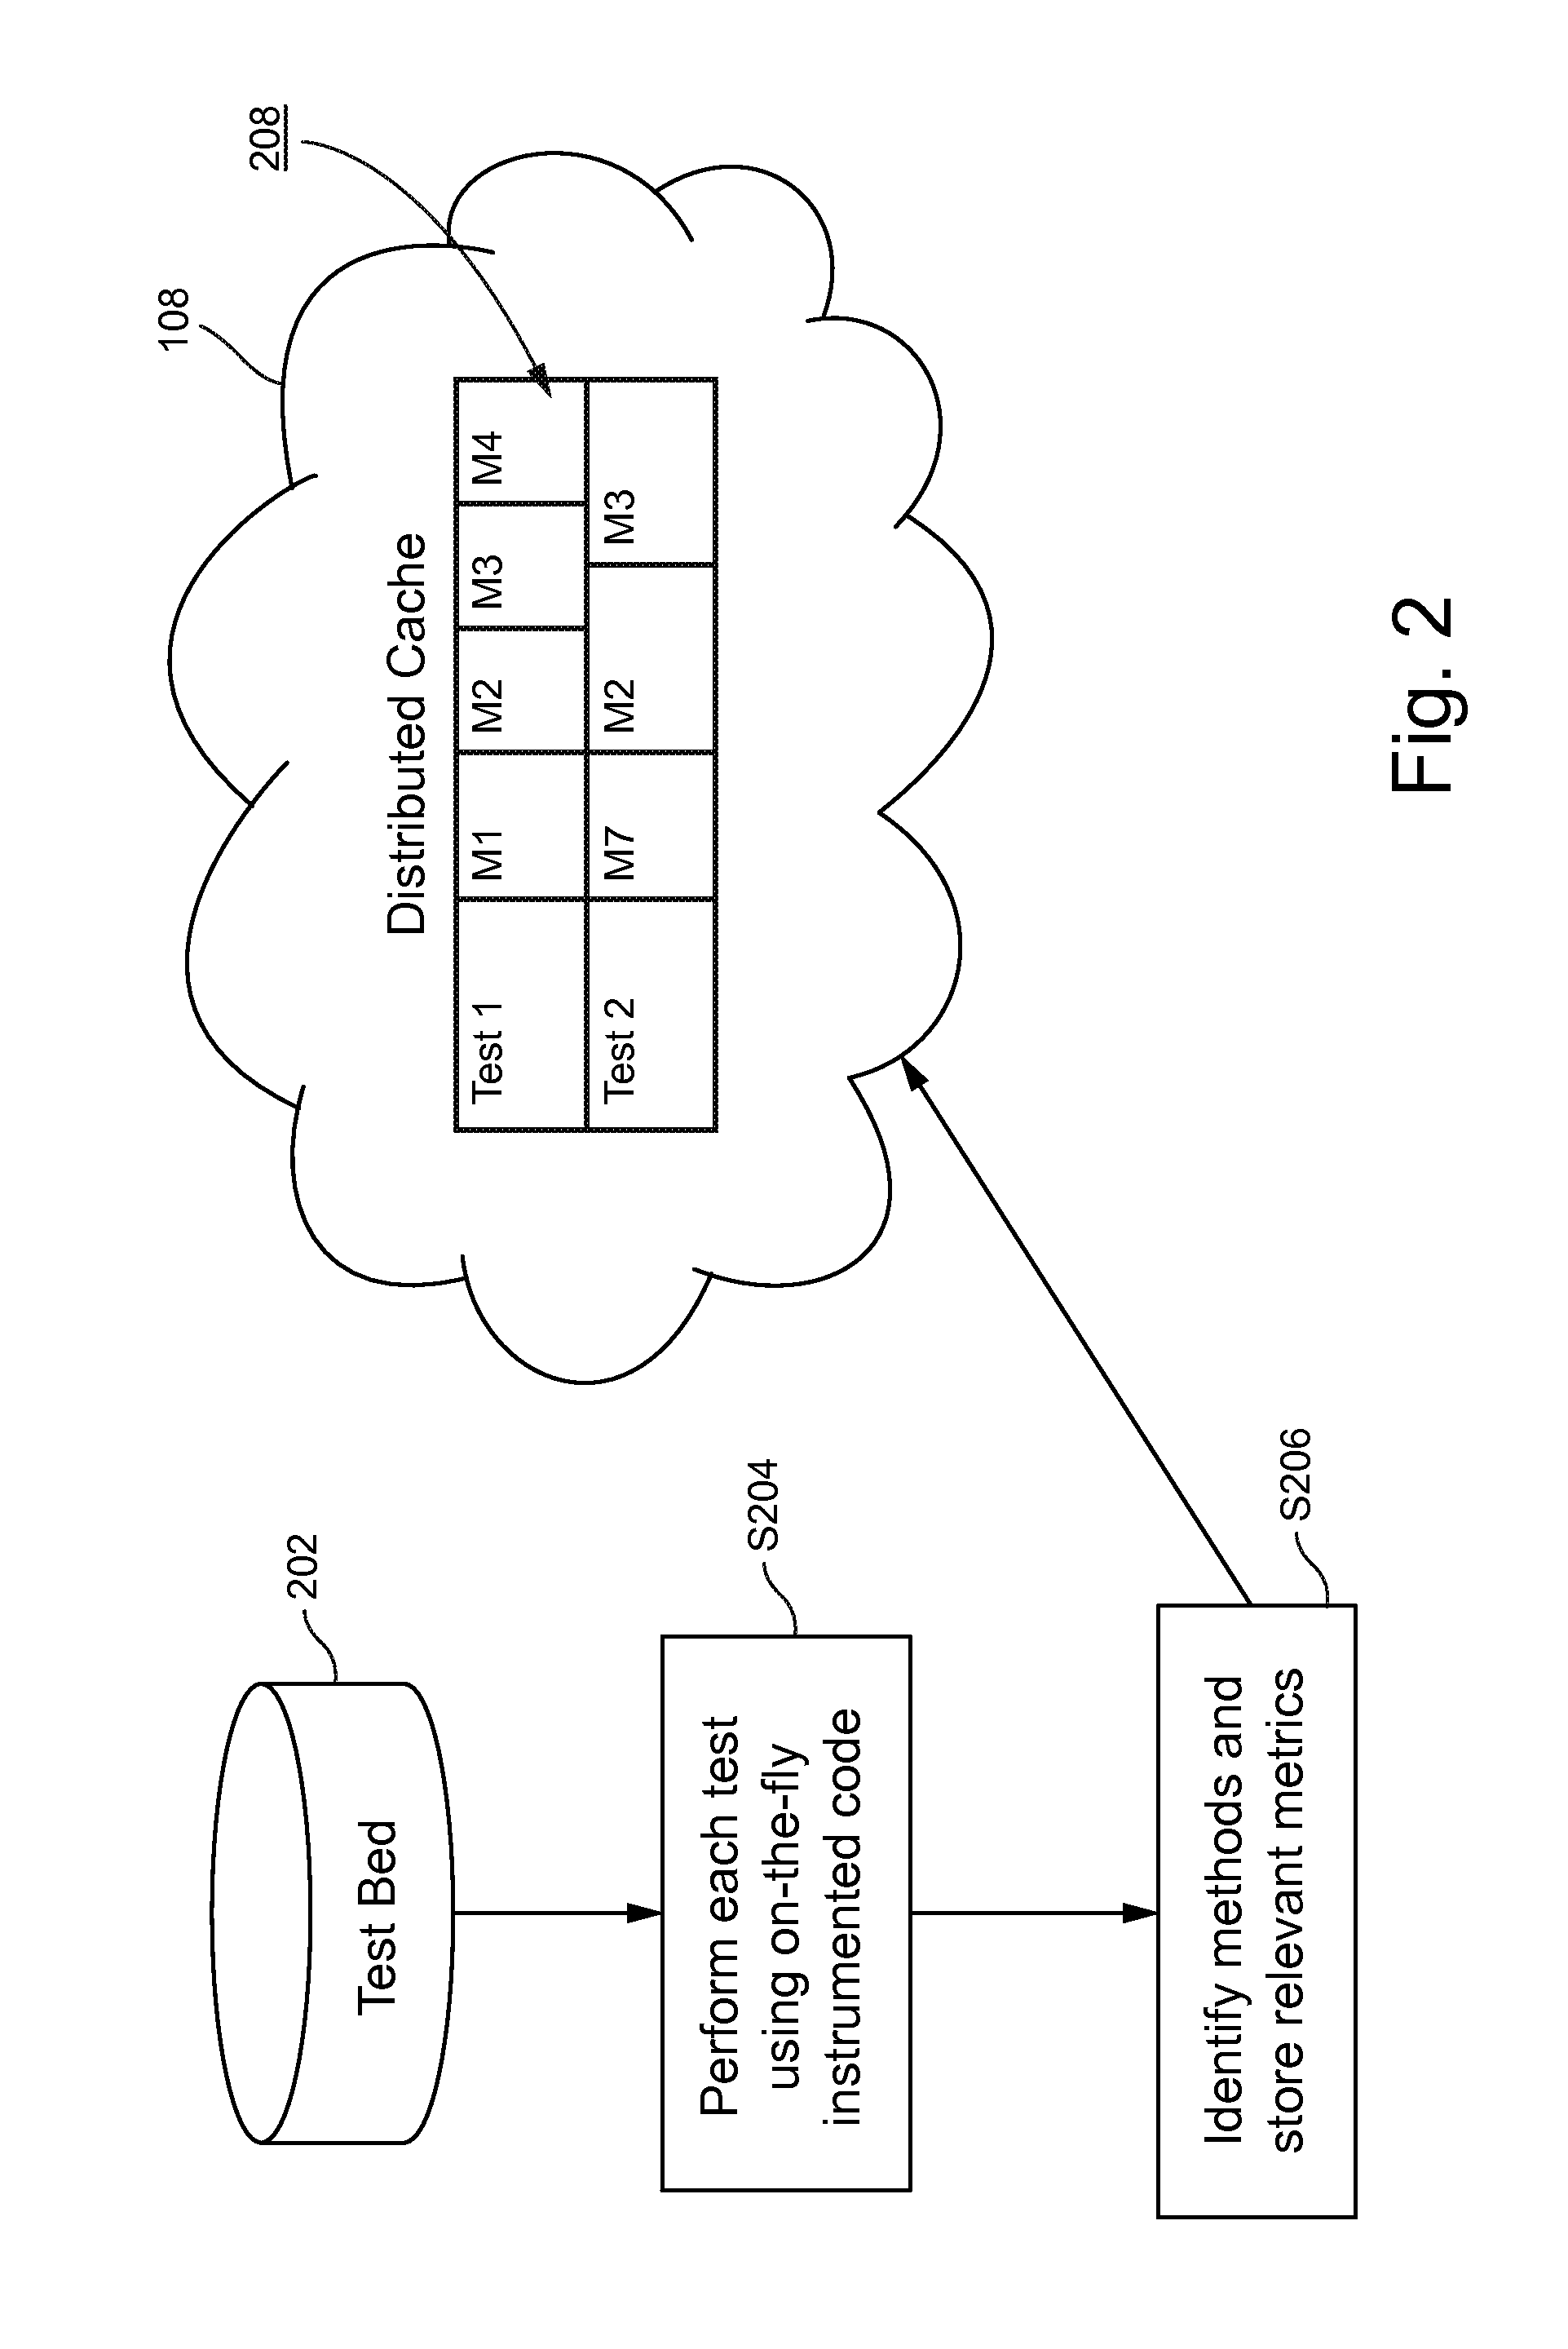 Systems and/or methods for executing appropriate tests based on code modifications using live, distributed, real-time cache and feedback loop